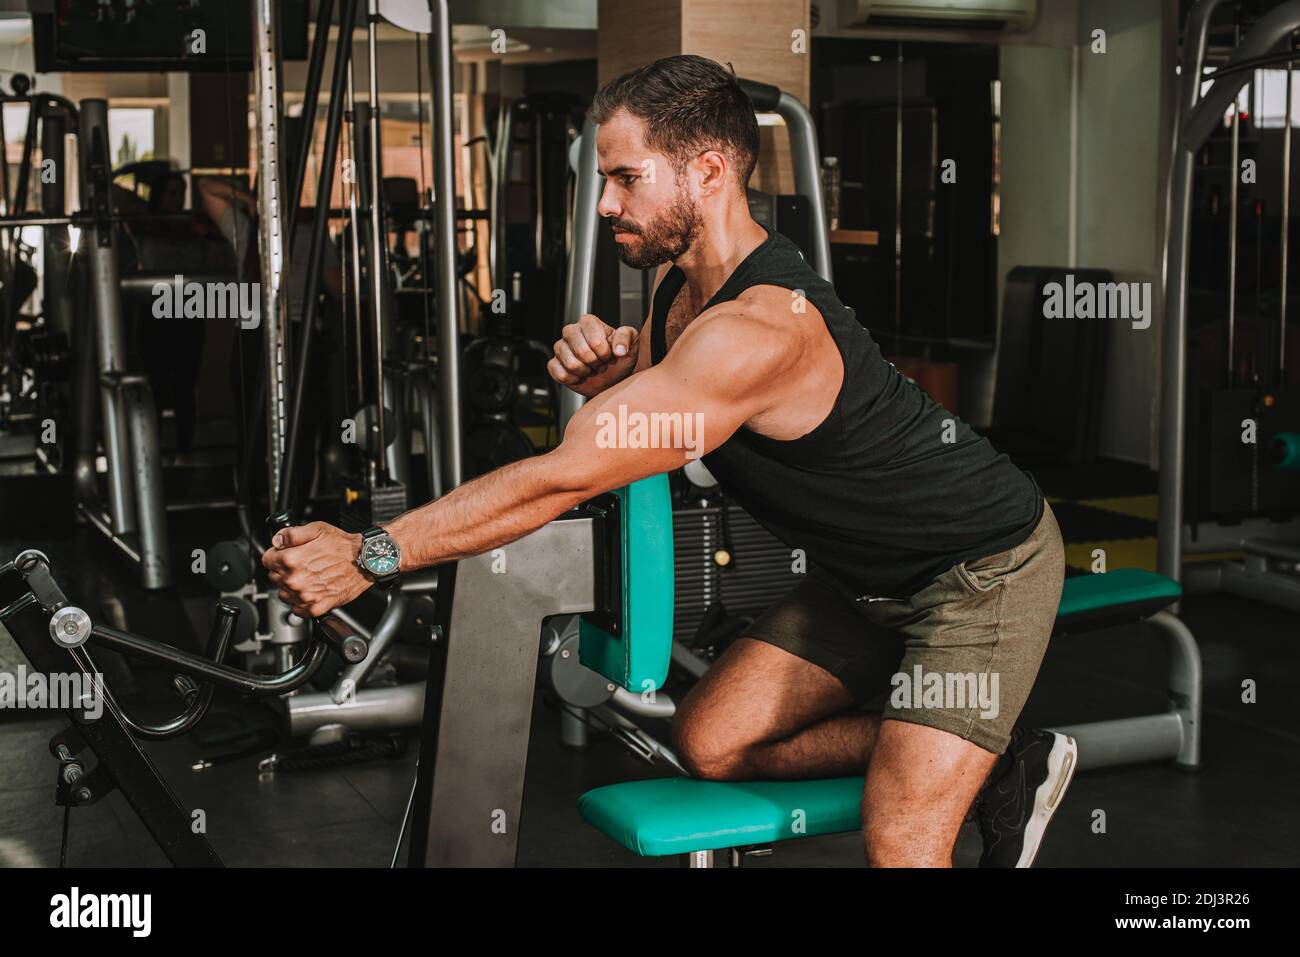 Man working out in gym, fitness time Stock Photo